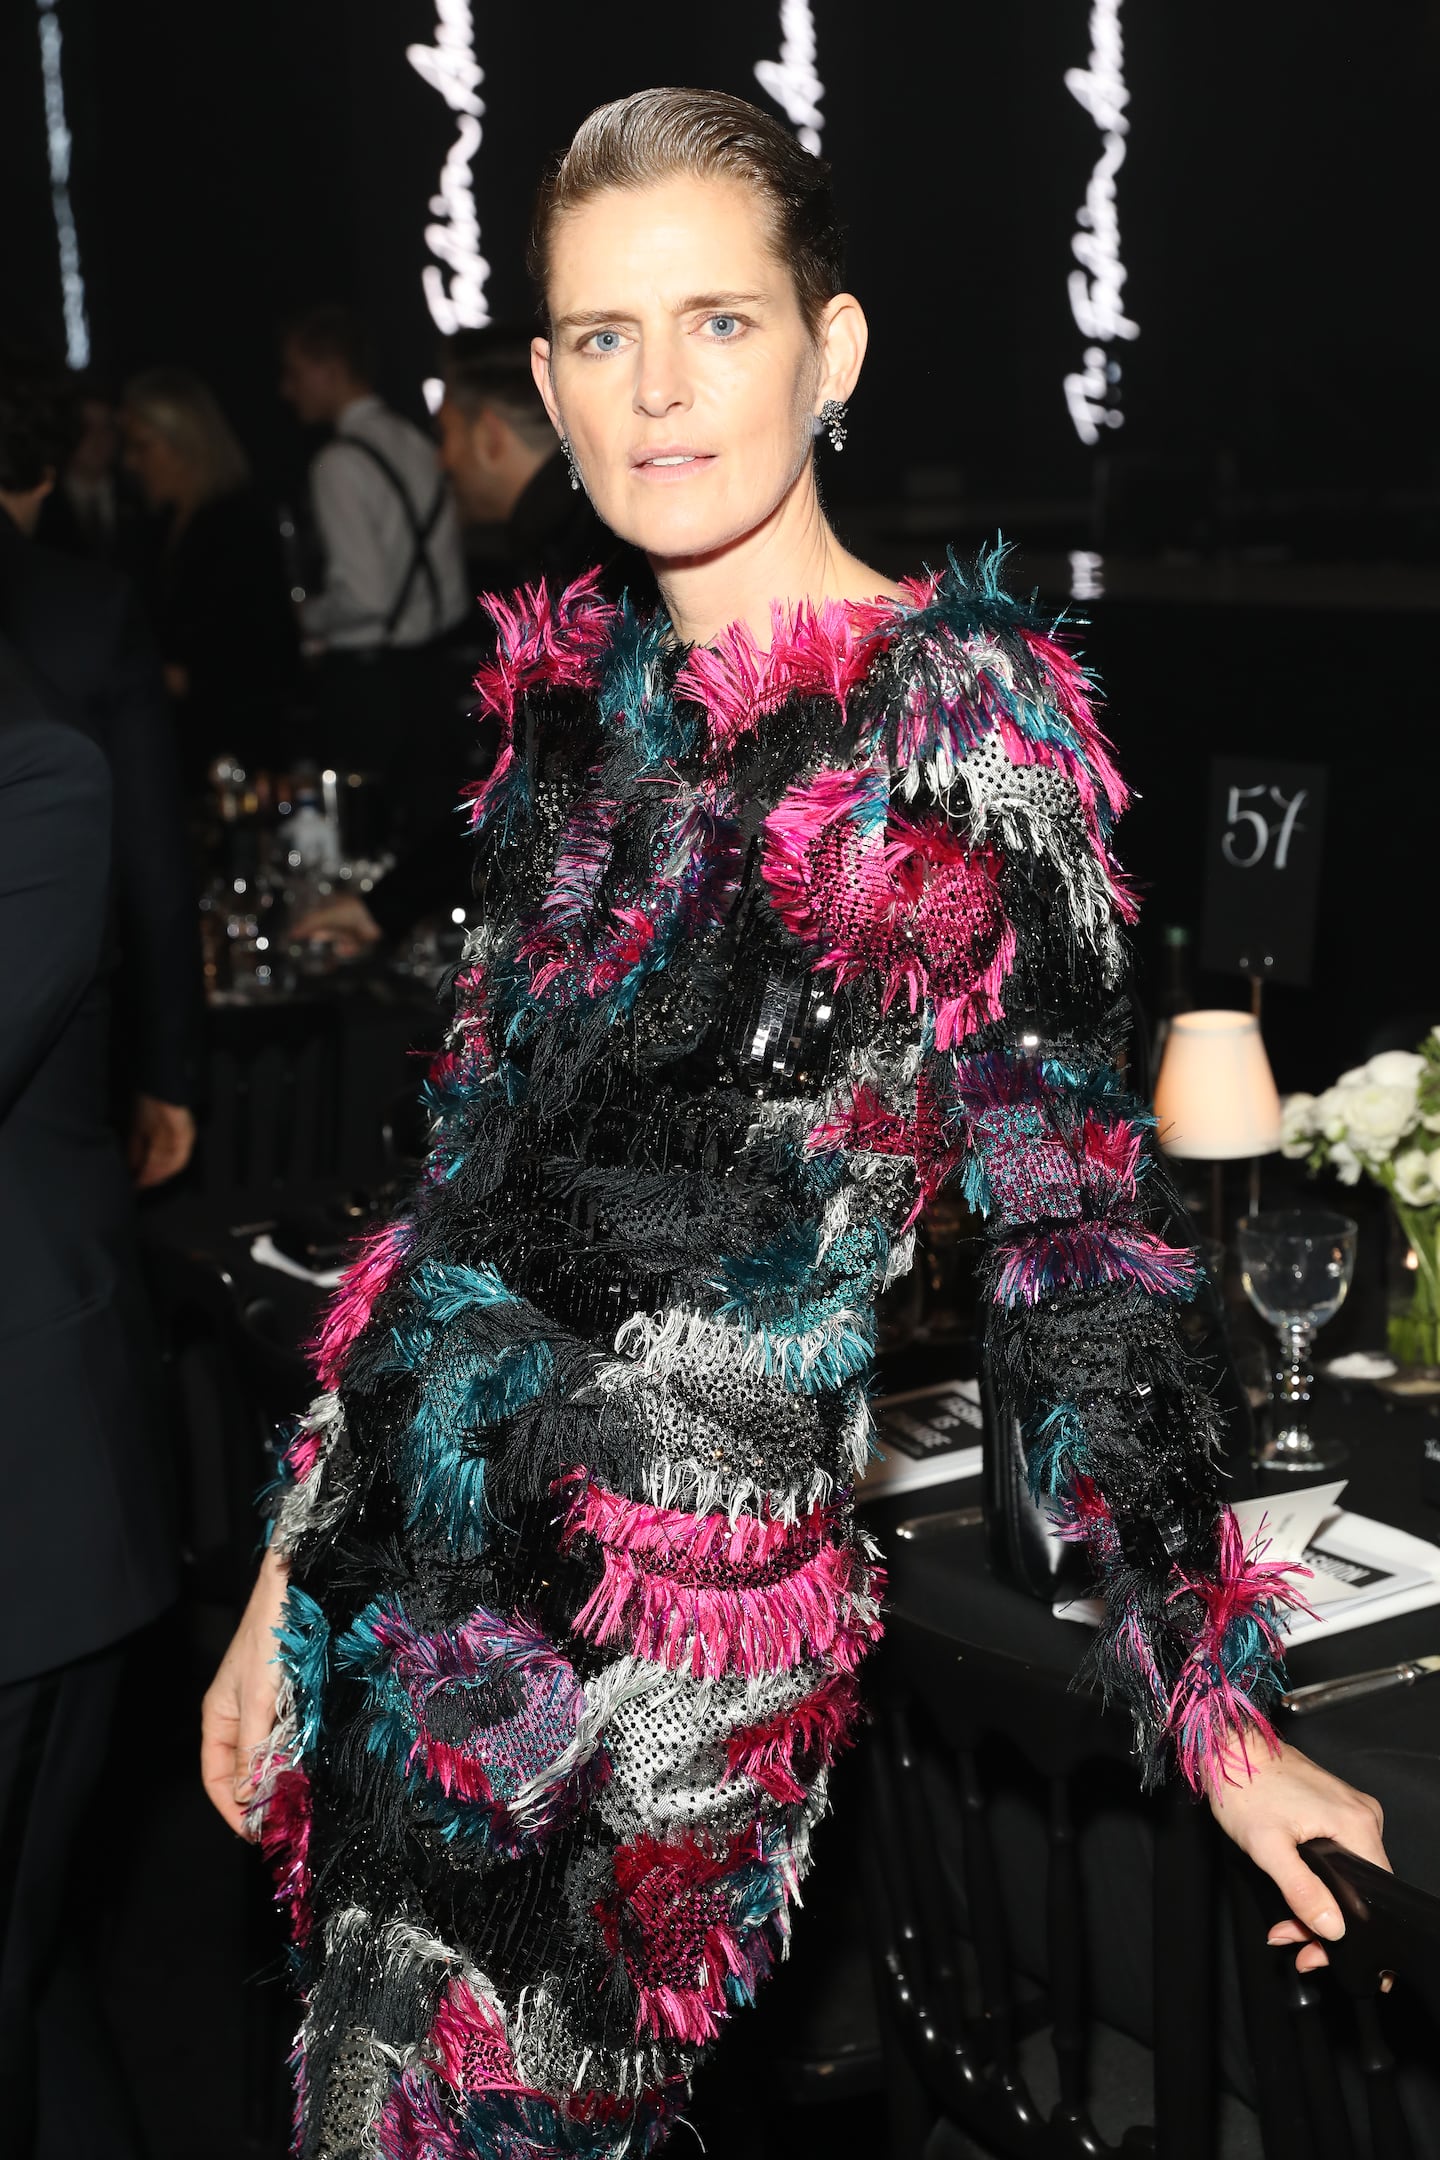 Stella Tennant attends The Fashion Awards 2019 at Royal Albert Hall in London, England. Getty Images.